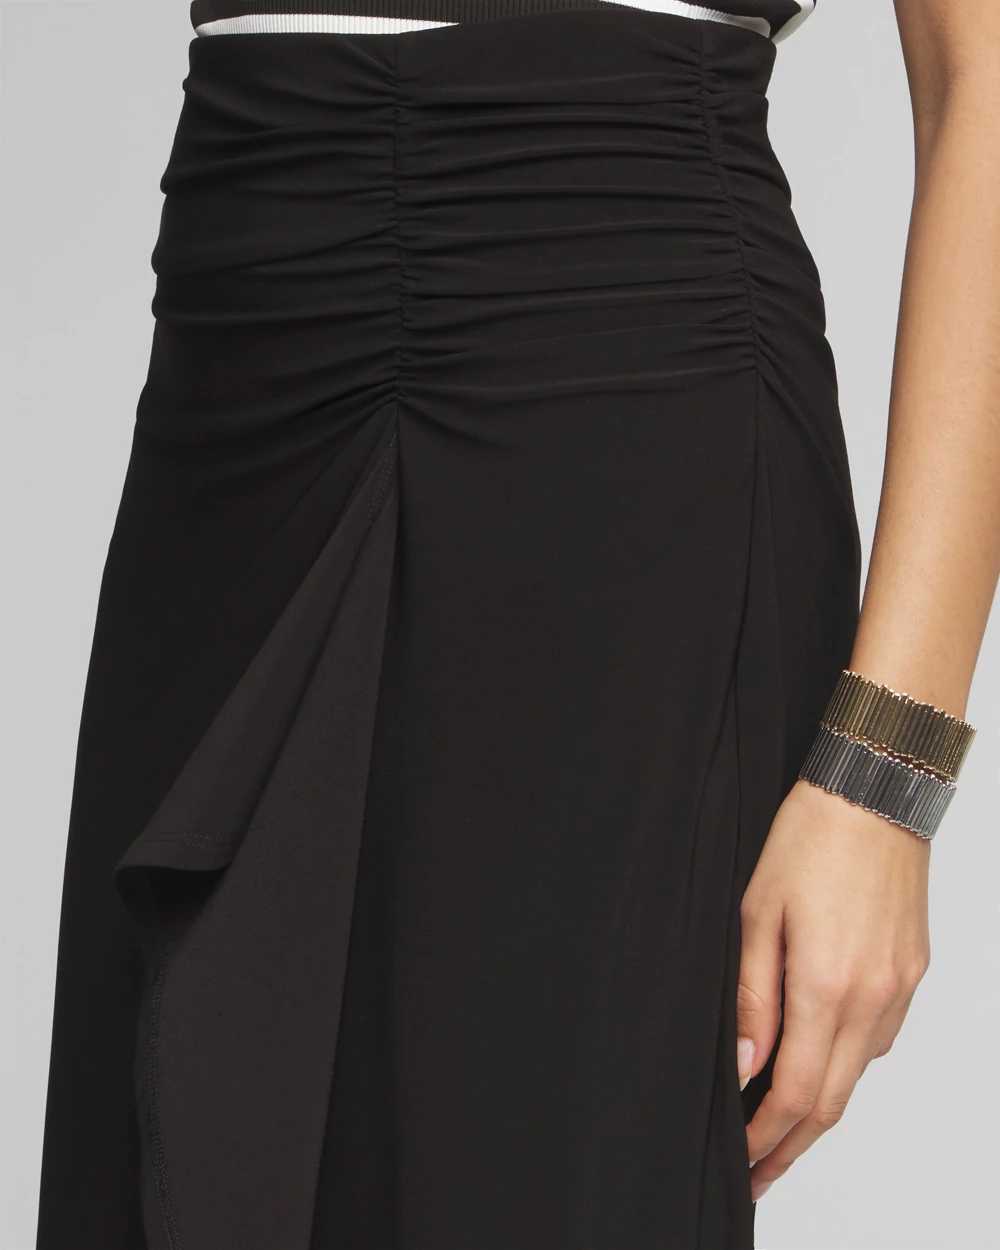 Petite Ruched Matte Jersey Surplice Skirt click to view larger image.